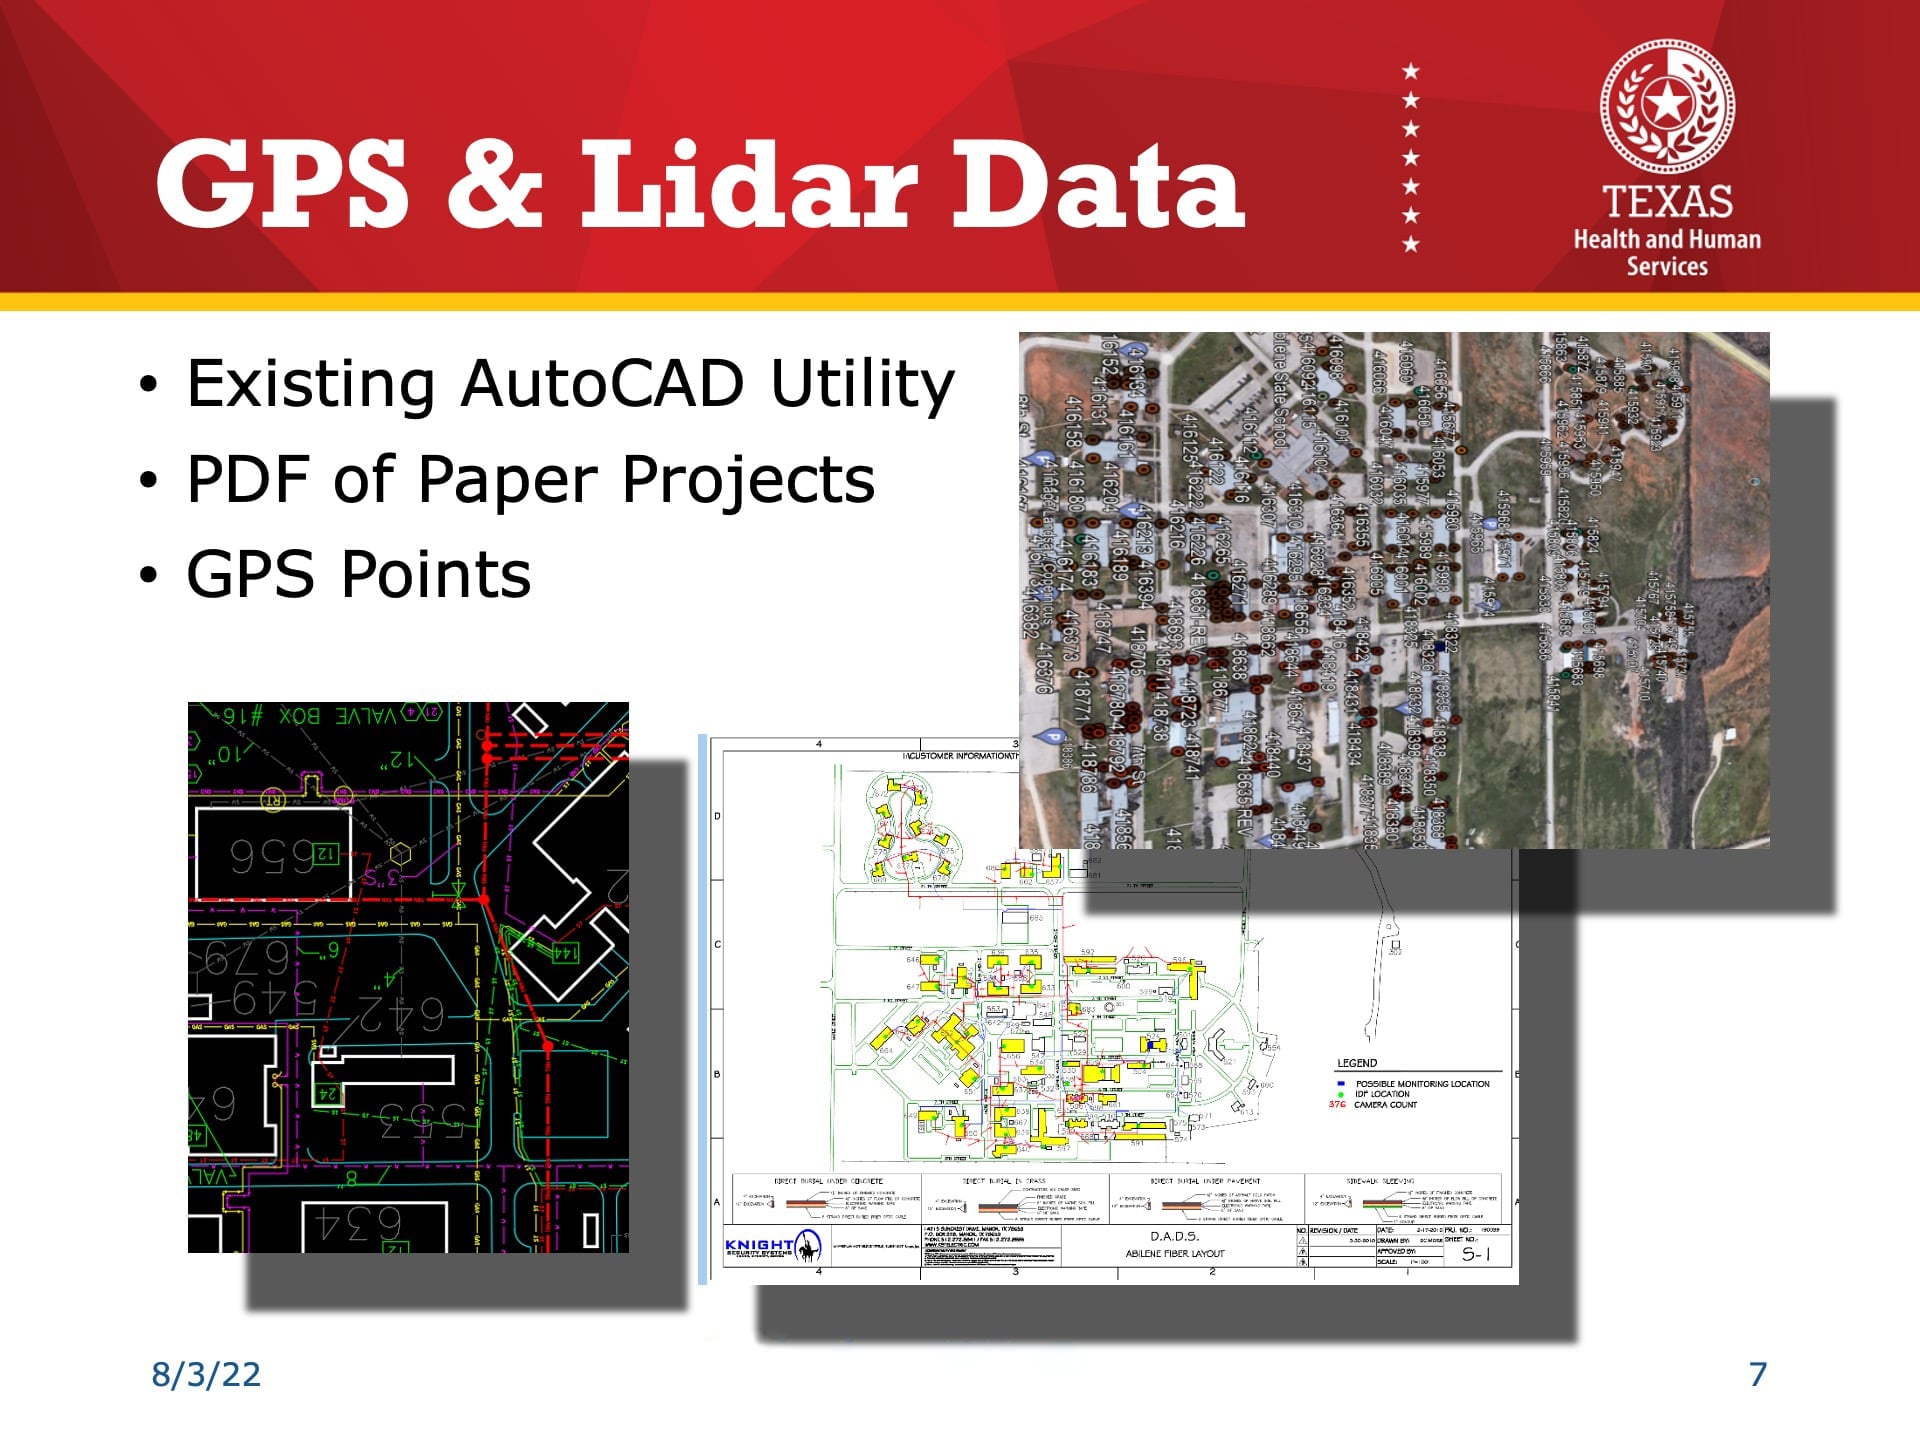 Esri UC 2022 Slide Reading: "GPS & Lidar Data." Bullet points include: "Existing AutoCAD Utility, PDF of Paper Projects, GPS Points." Three maps are displayed of CAD drawings containing georeferenced pointsand also drone imagery.